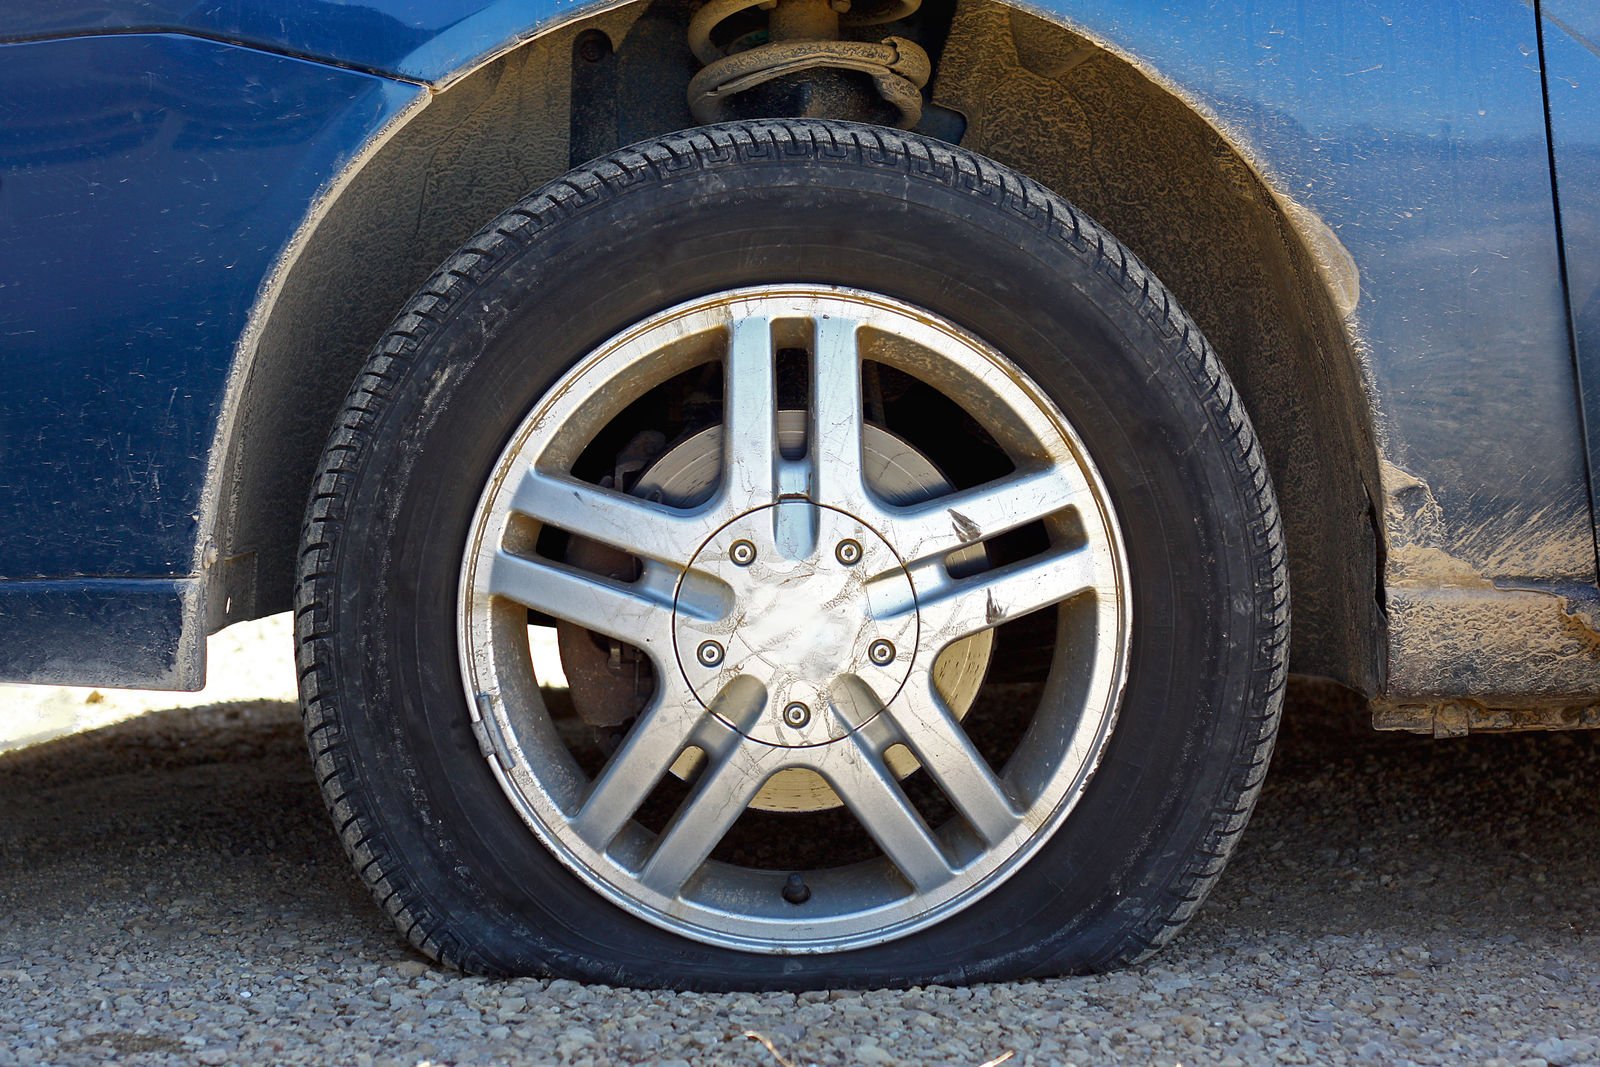 Does car insurance cover slashed tires?